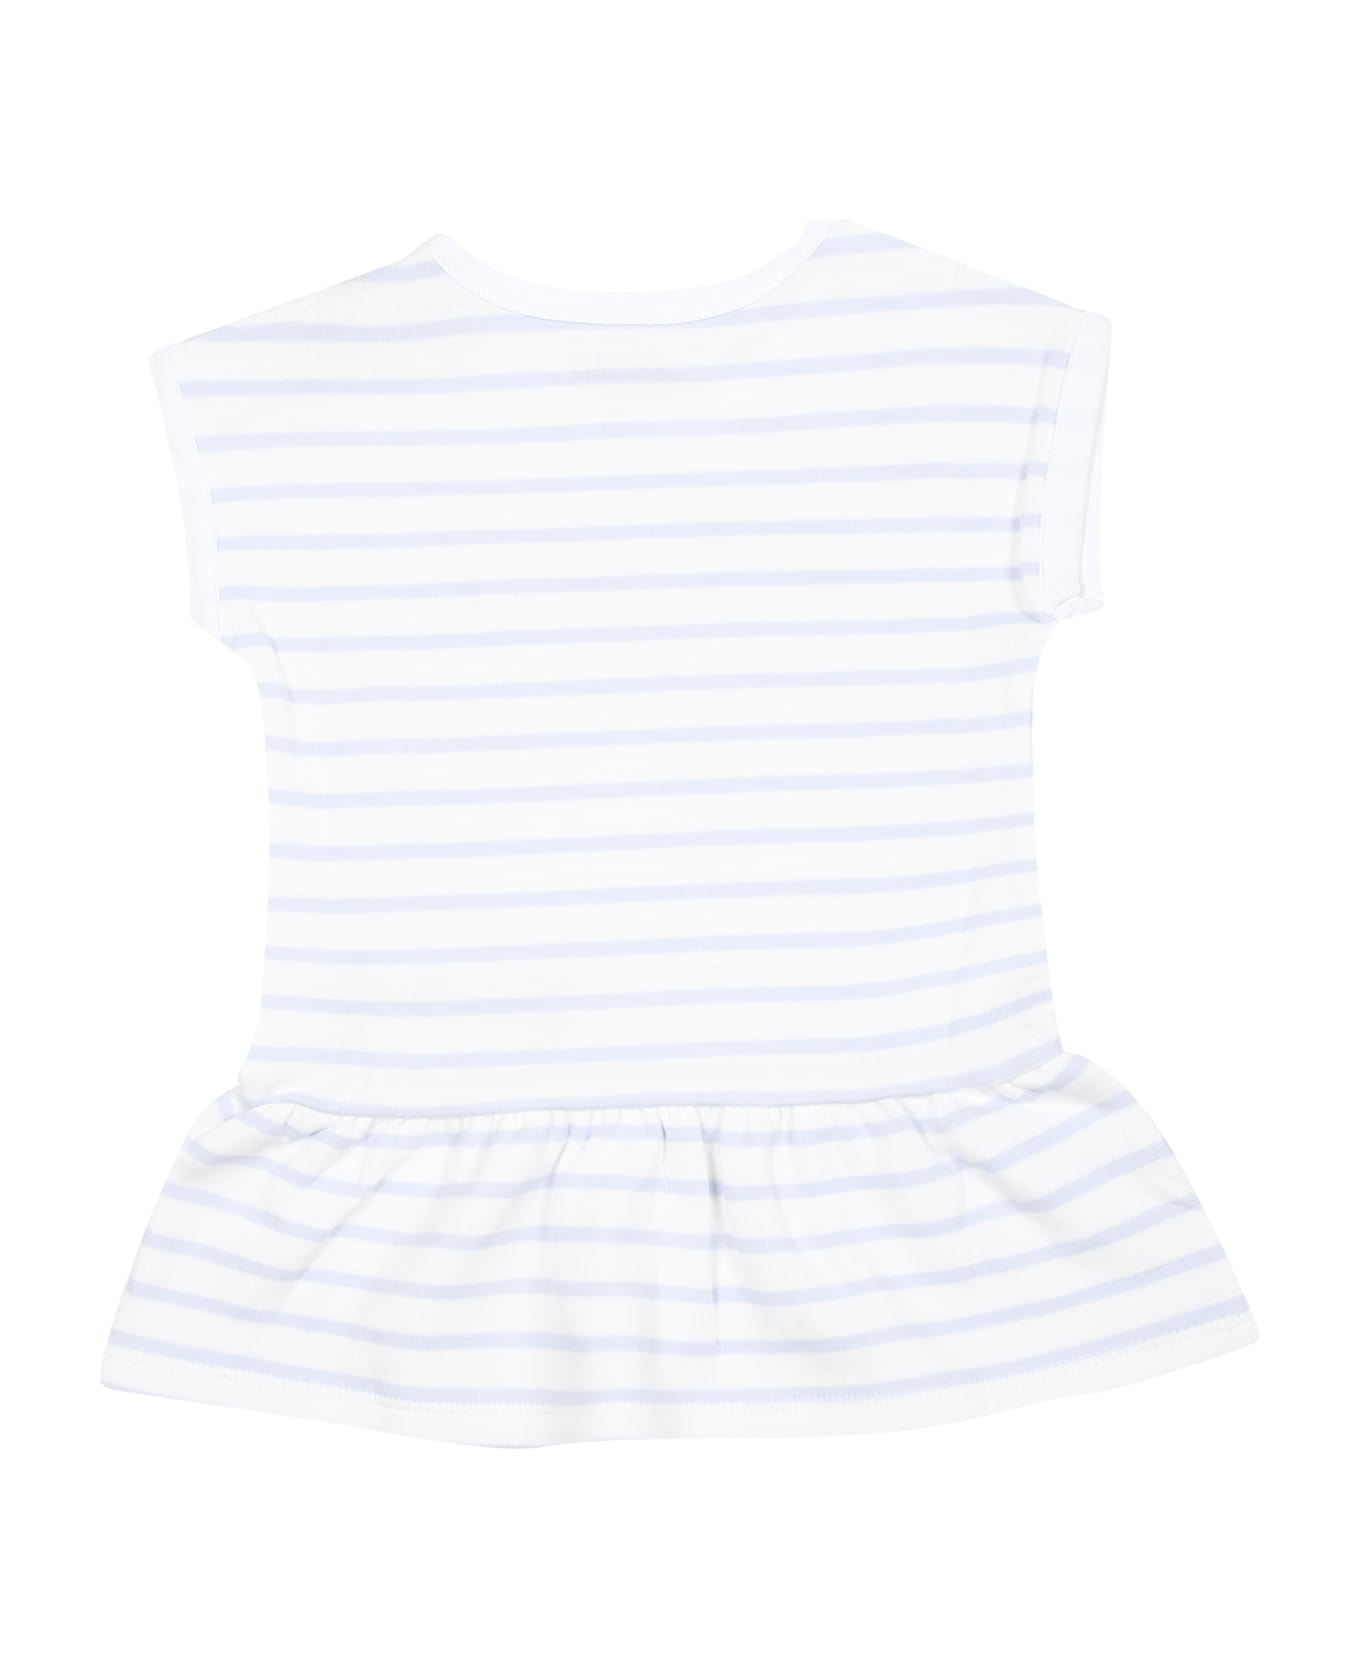 Kenzo Kids White Sports Suit For Baby Girl With Marine Animals - White ボトムス